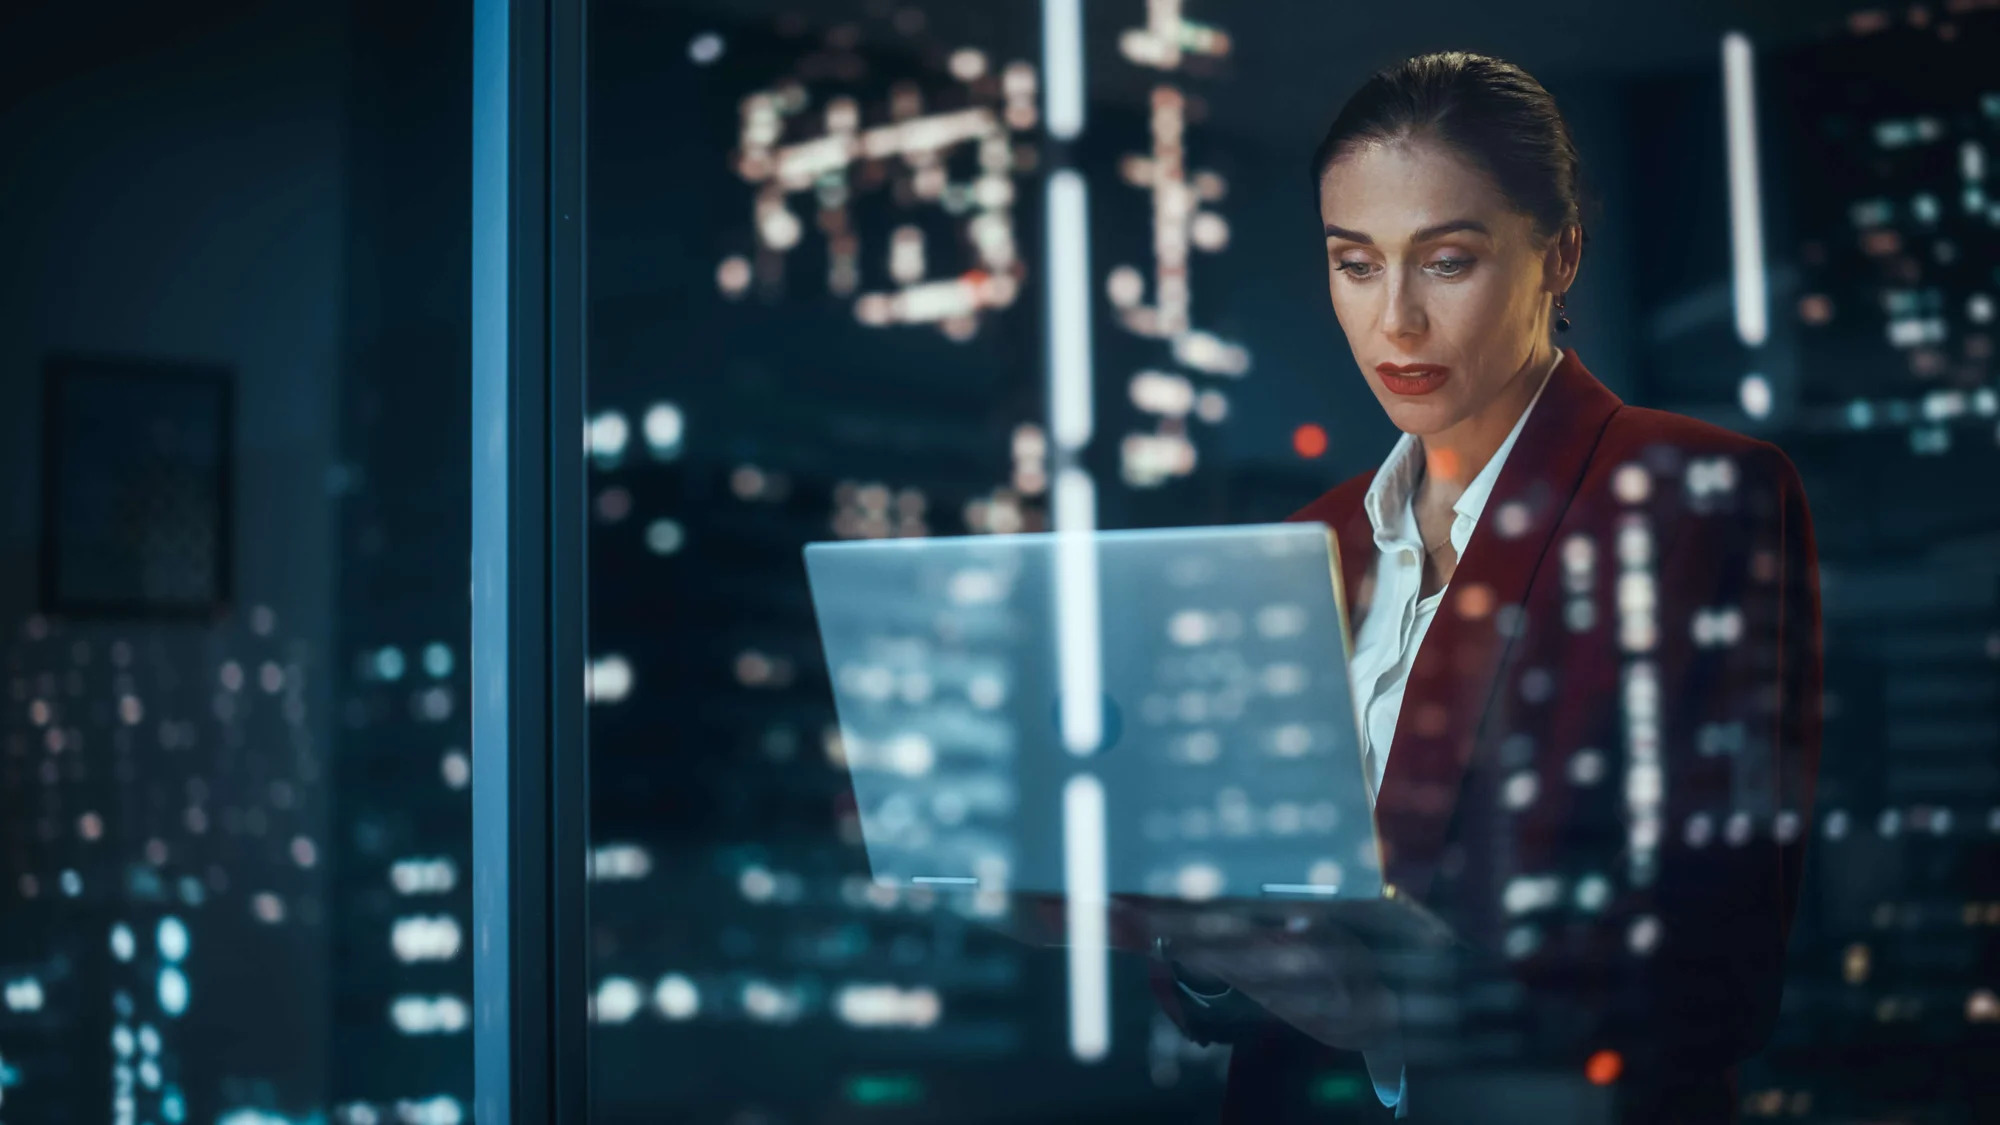 A woman in a business suit is using a laptop at night.